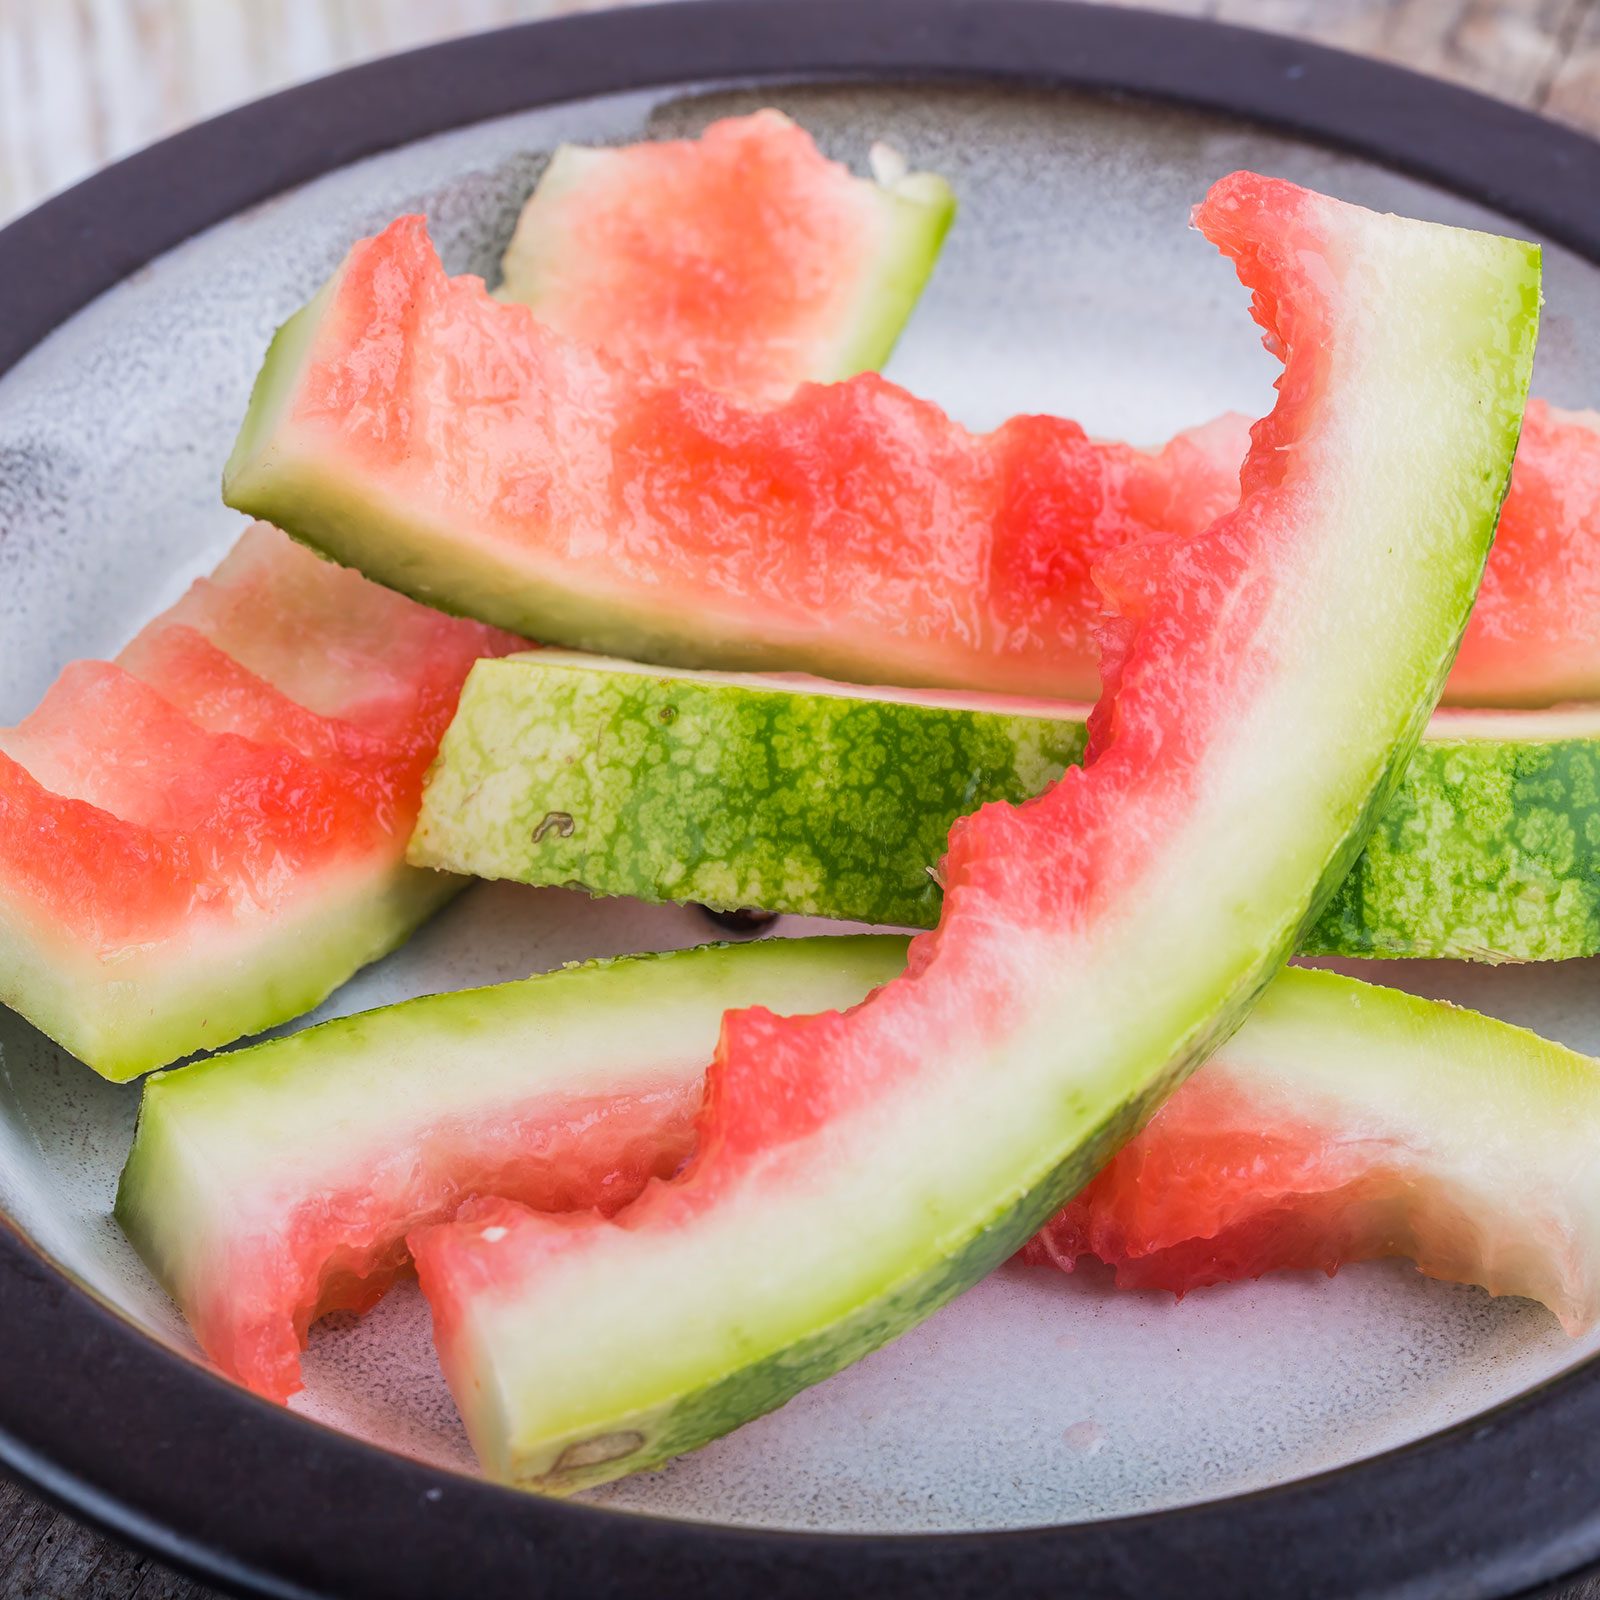 Watermelon Rinds on a plate